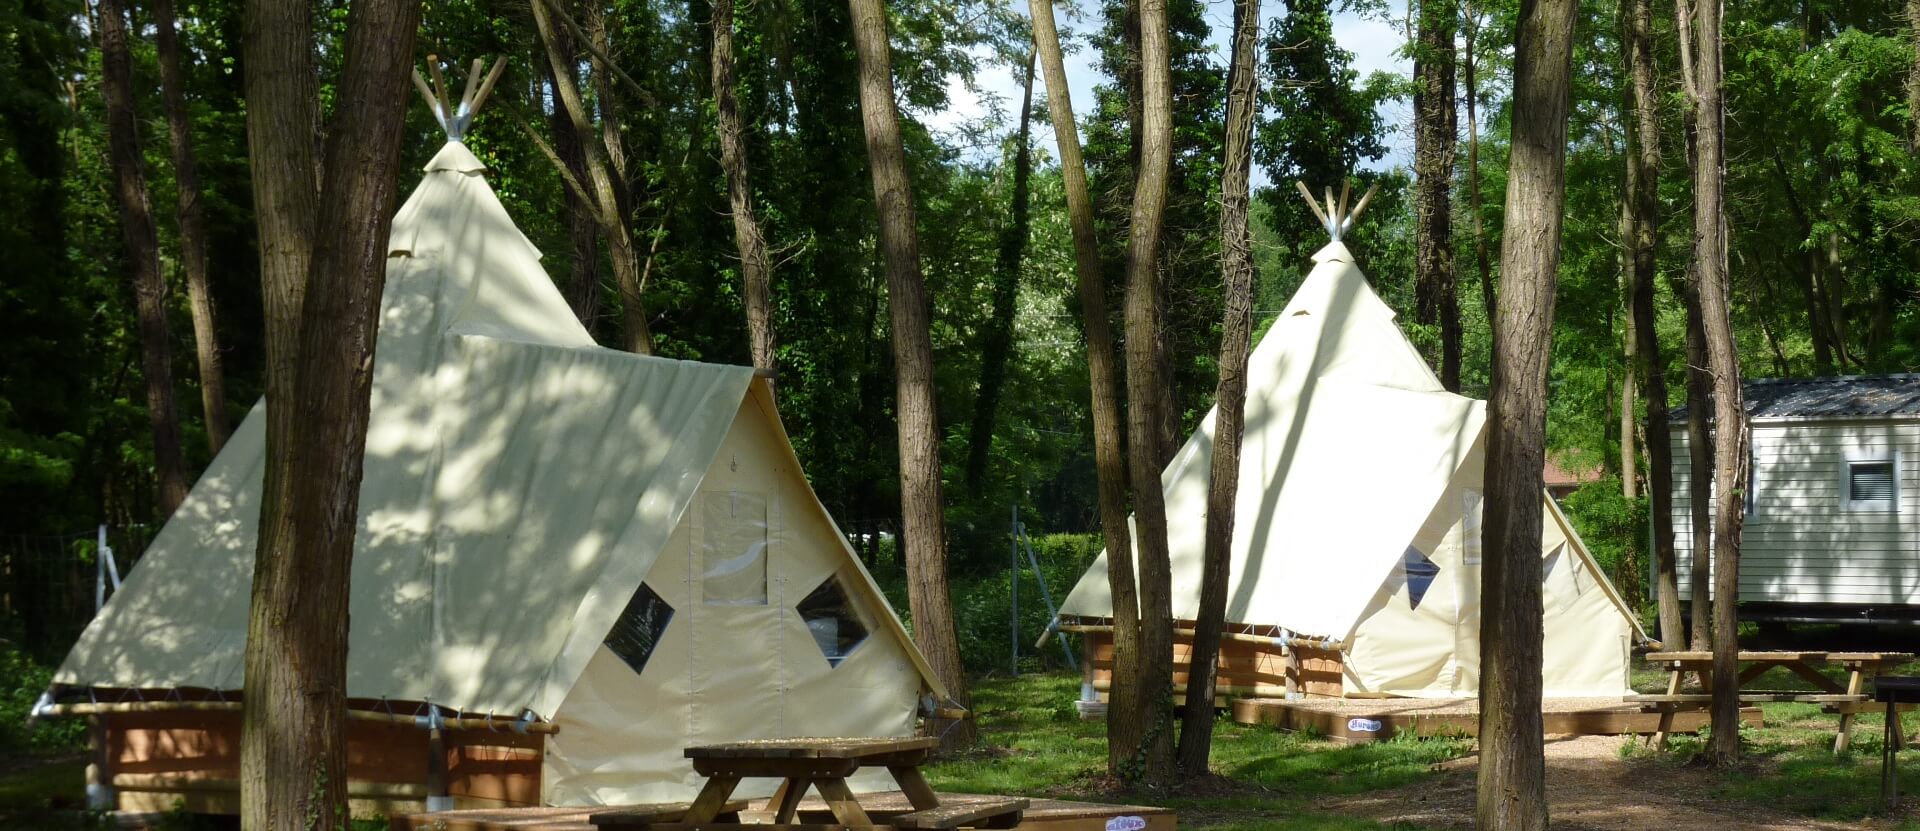 Unusual accommodation in a Tipi tent in Ain